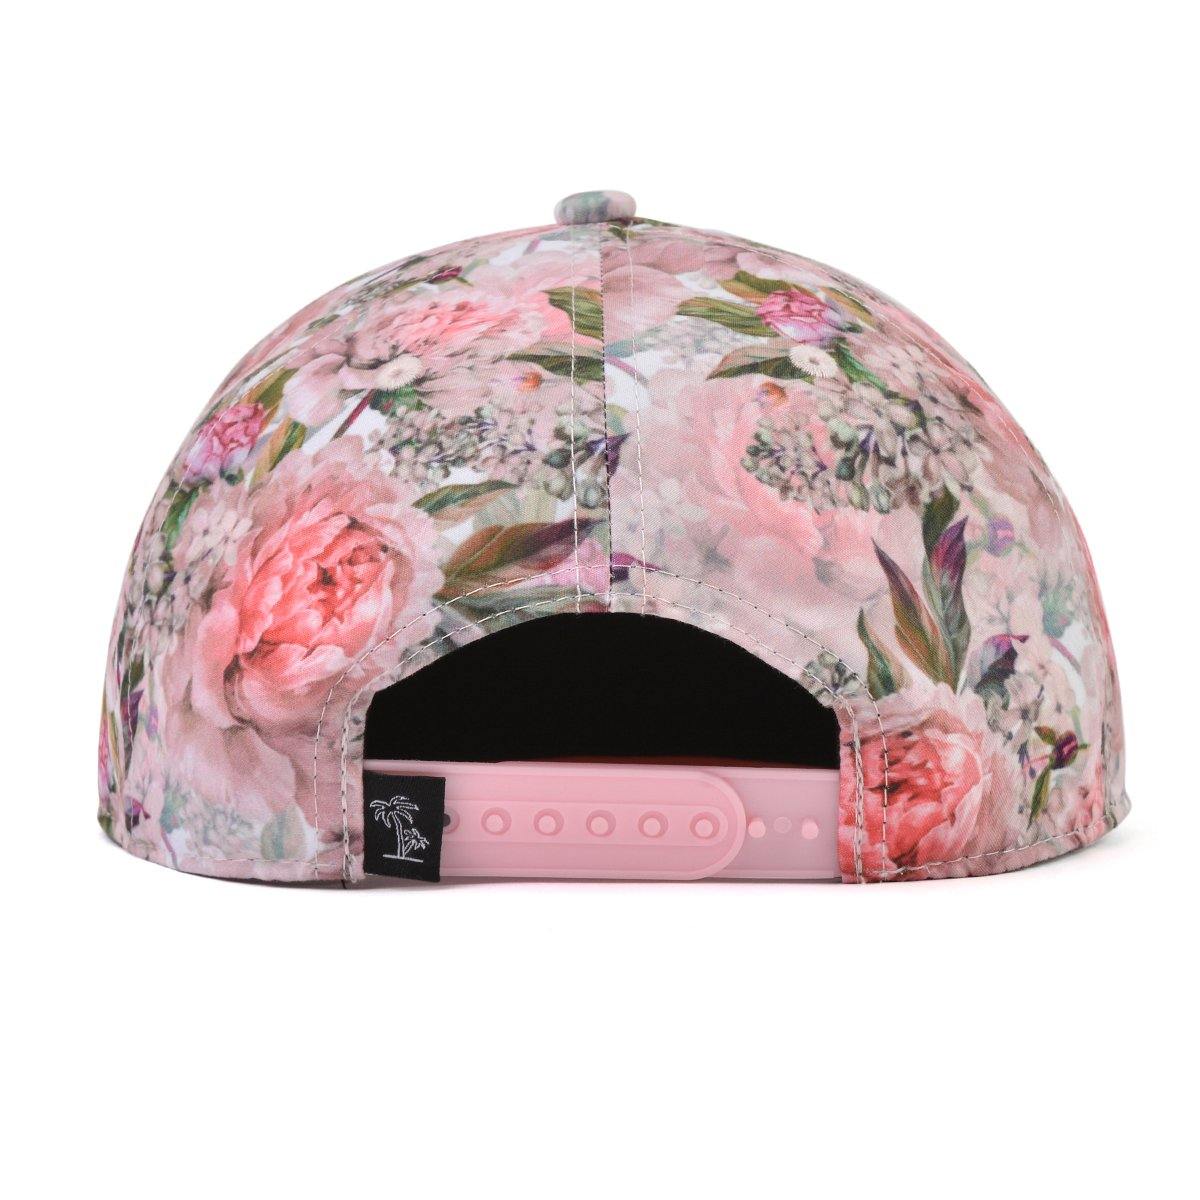 Kids and women's pink floral snapback hat. Cubs & Co. Australia.